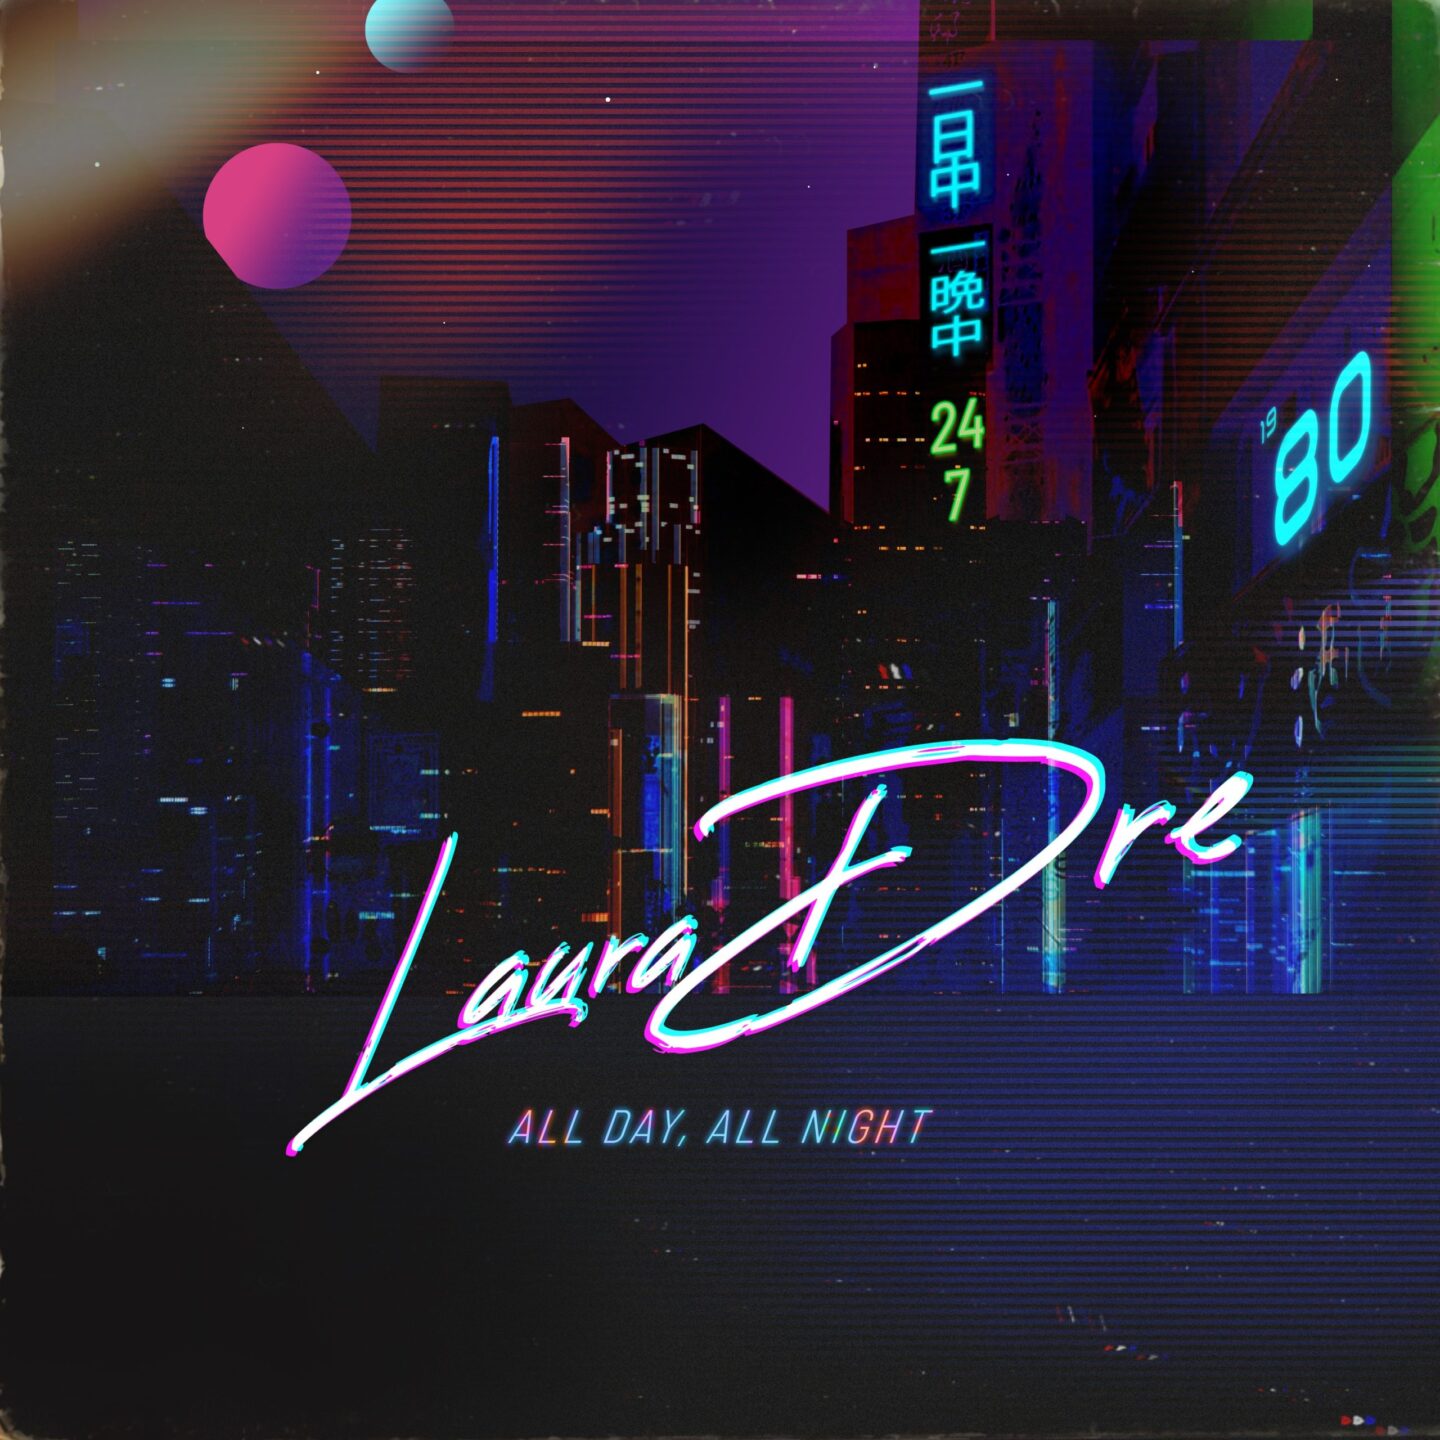 Laura Dre - All Day All Night Single Artwork Cover